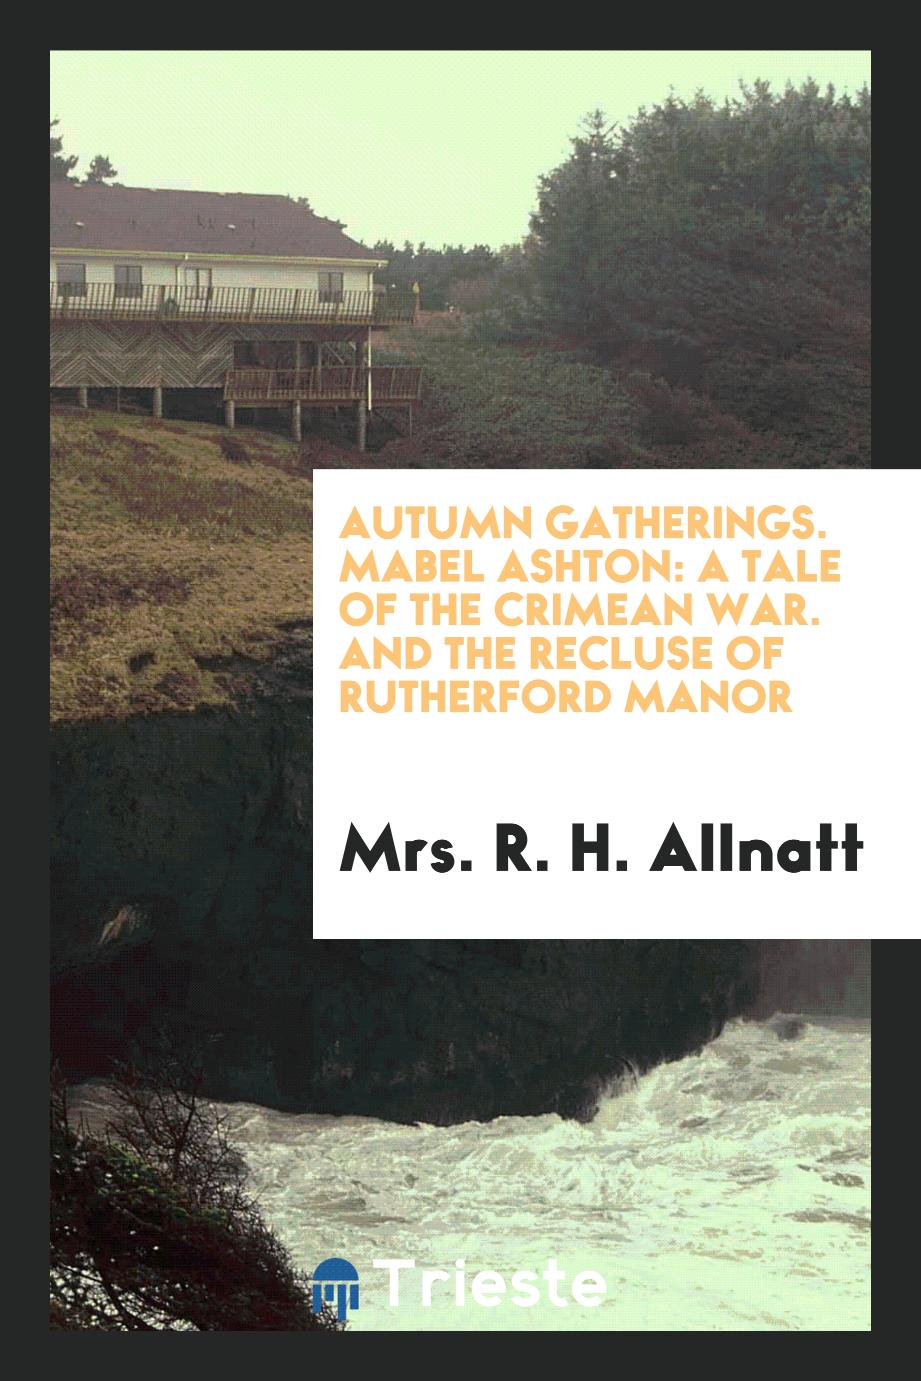 Autumn Gatherings. Mabel Ashton: A Tale of the Crimean War. And the Recluse of Rutherford Manor